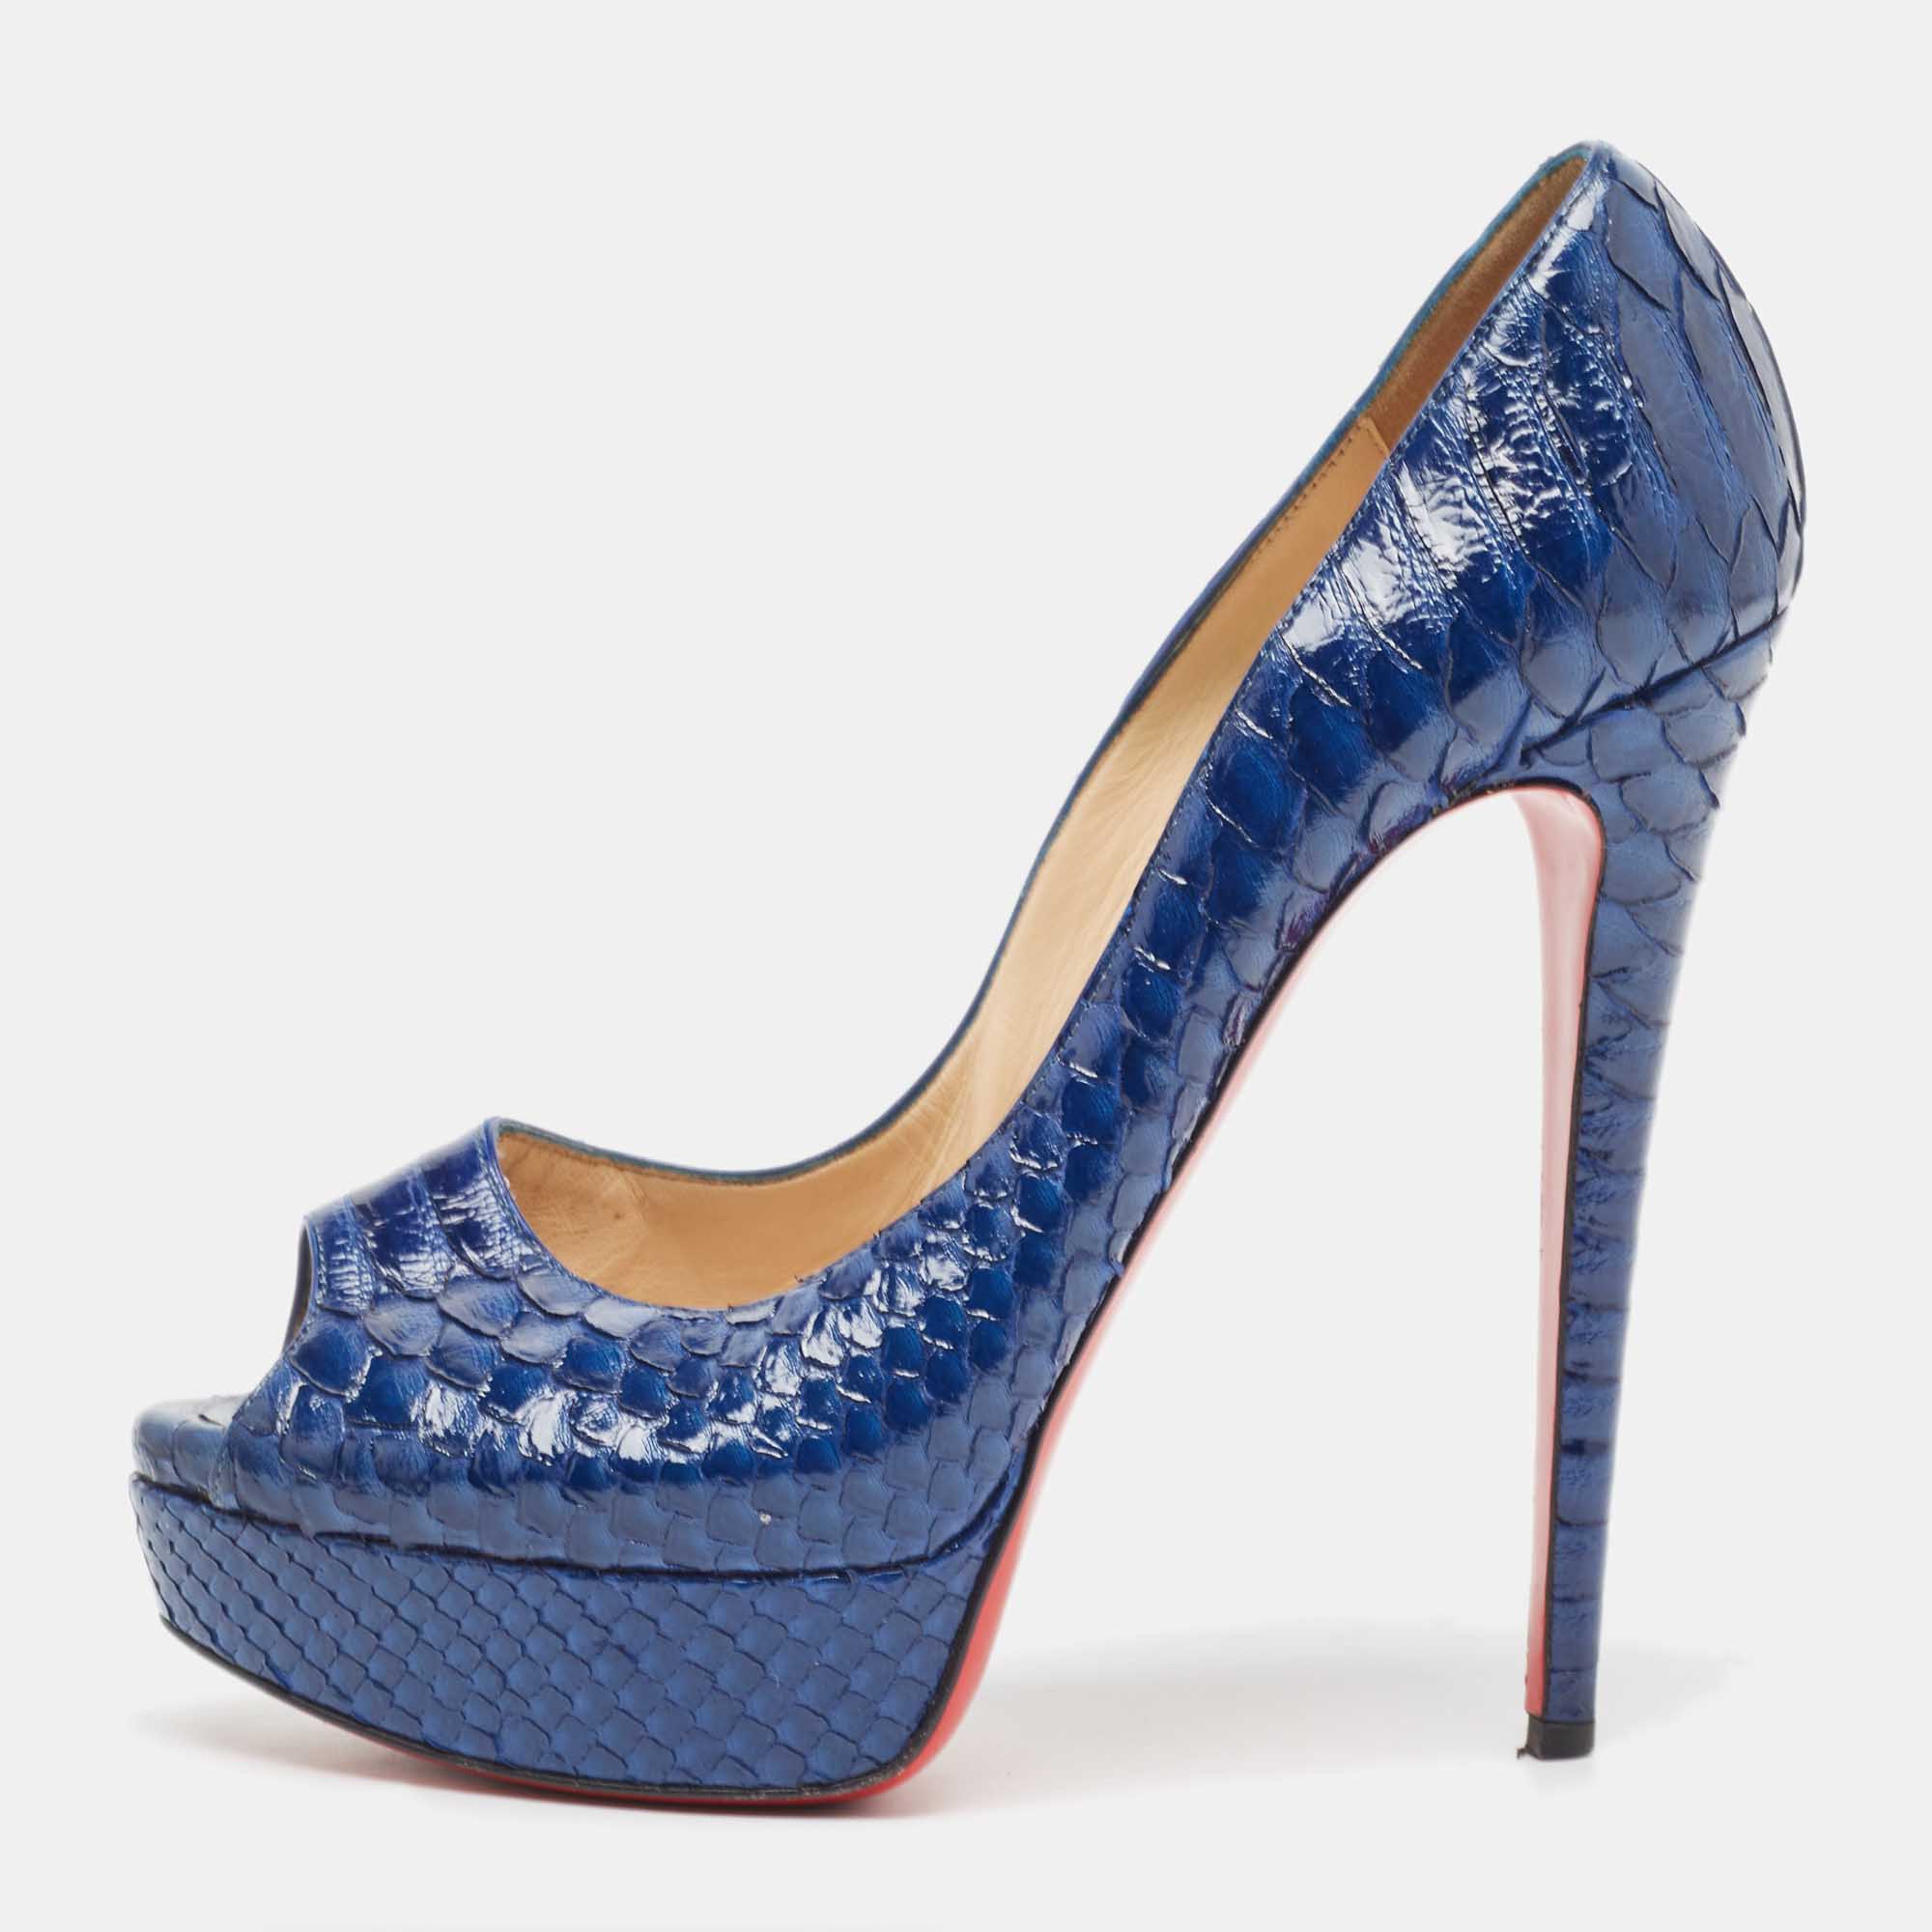 Stand out from the crowd with this luxurious pair of Louboutins that exude high fashion with class. Crafted from python leather this is a creation from their Lady Peep collection. It features a blue shade with peep toes and an architectural shape. Completed with leather insoles stiletto heels and signature red lacquered soles these shoes are elegant.